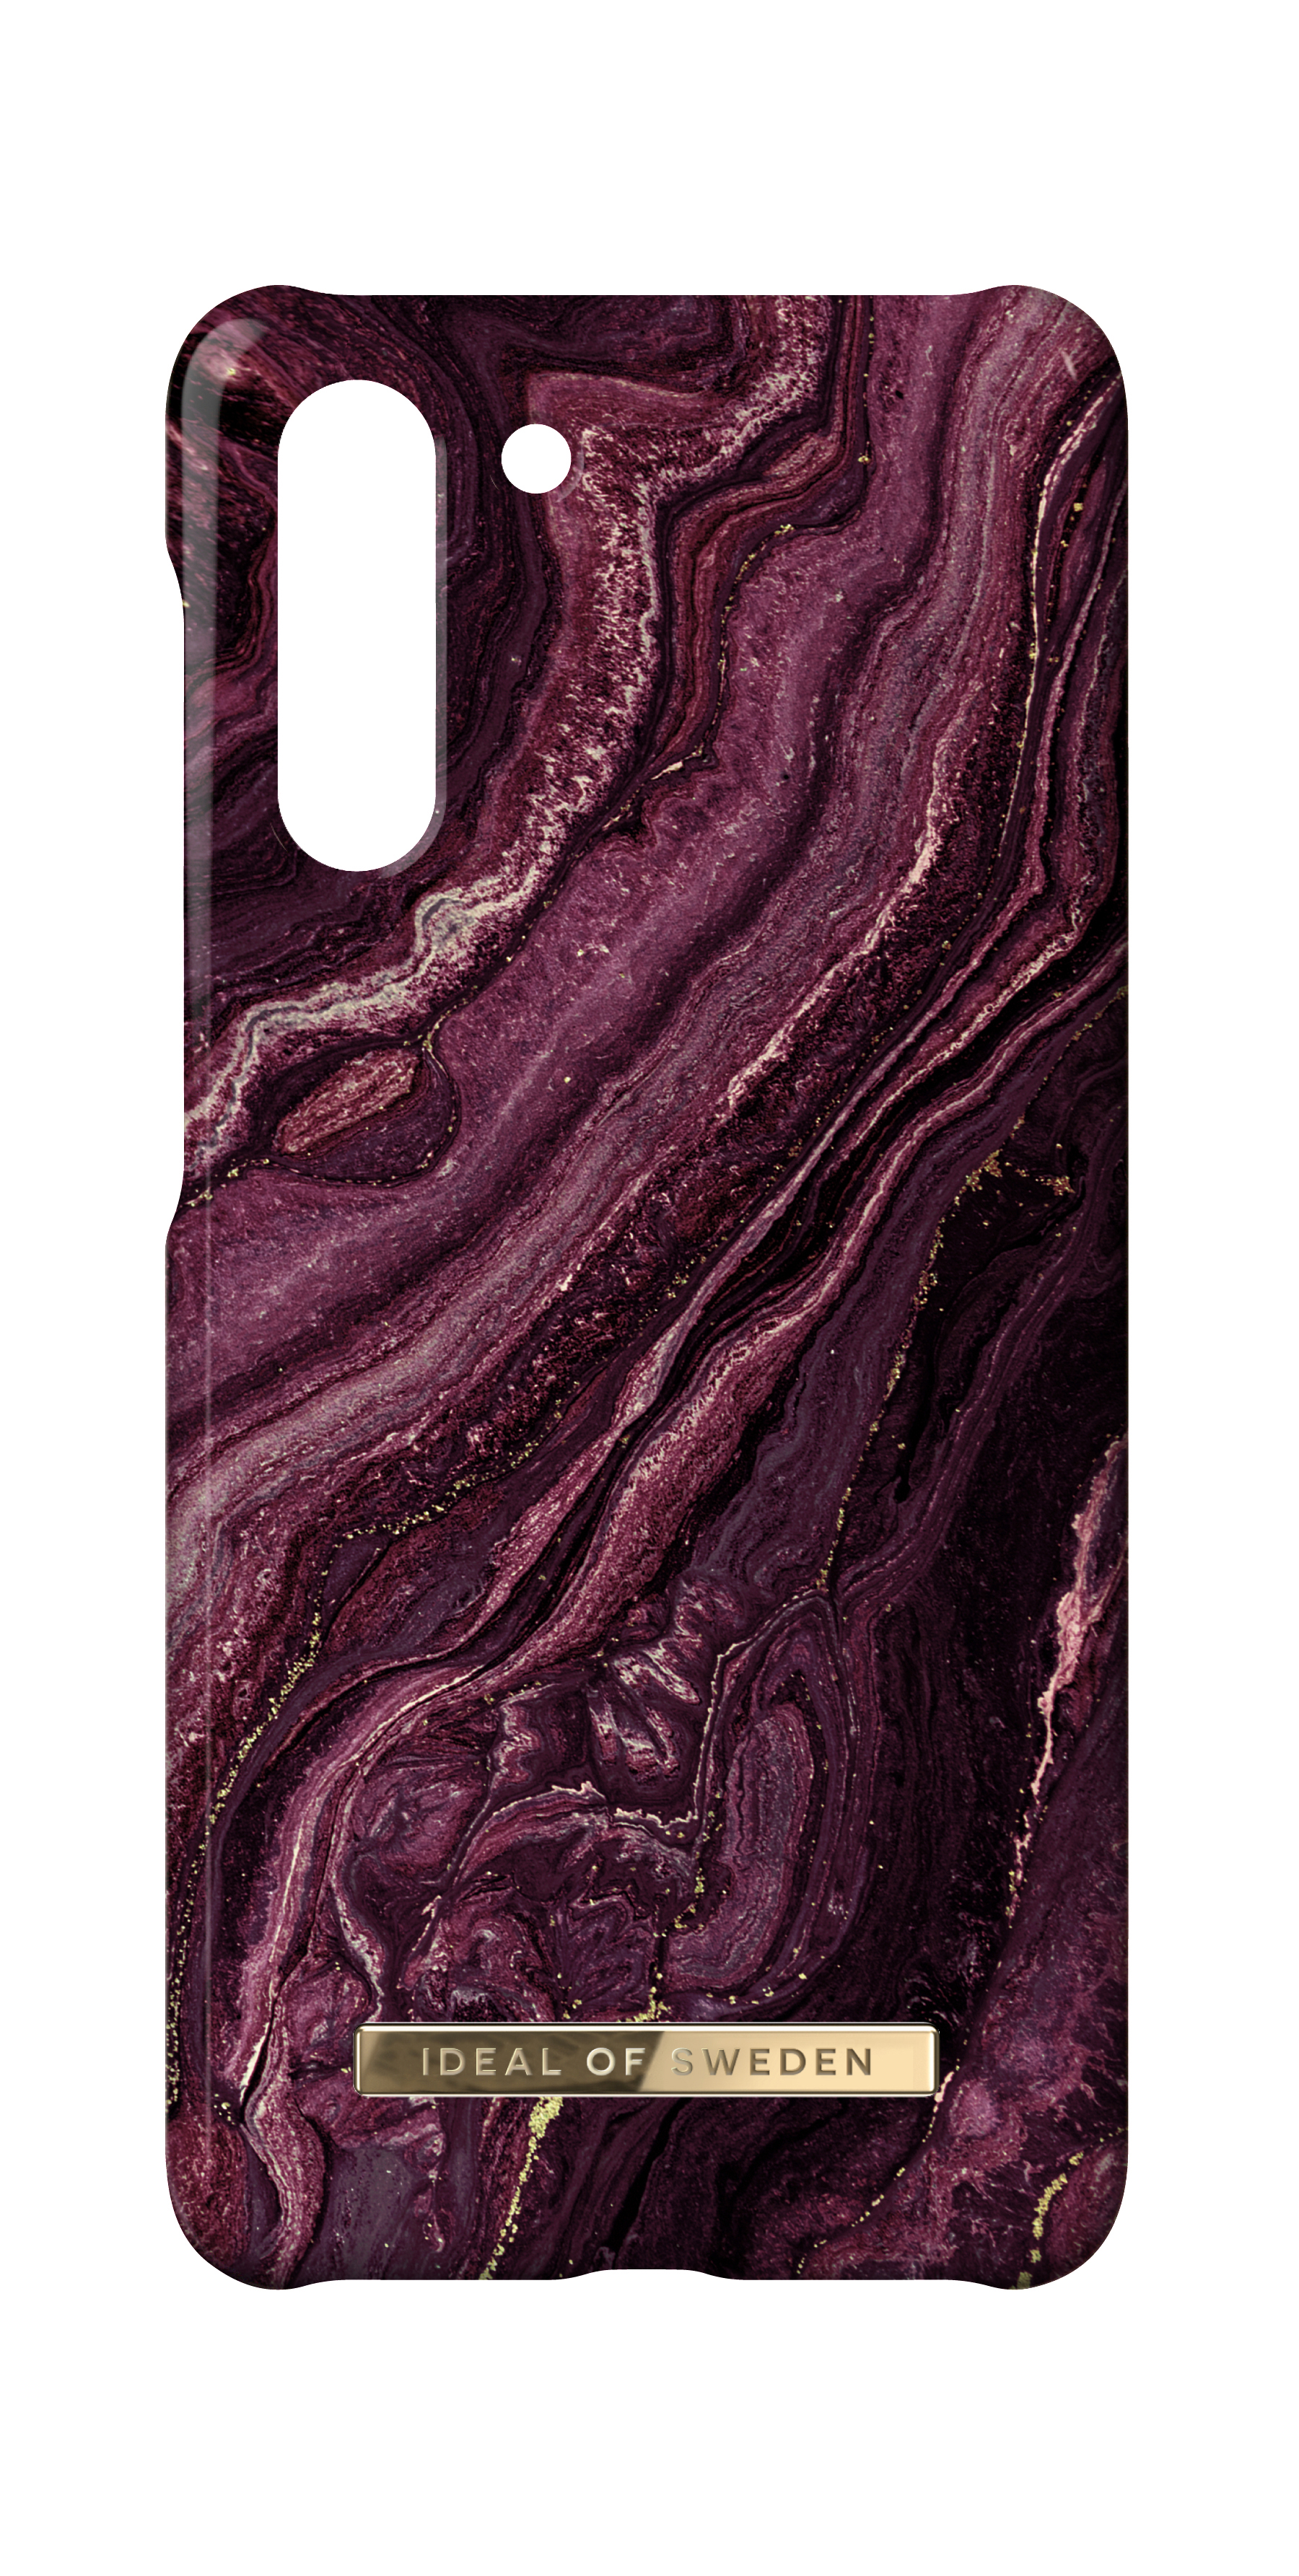 Case, Galaxy S21, OF Pflaume IDEAL SWEDEN Fashion Samsung, Backcover,